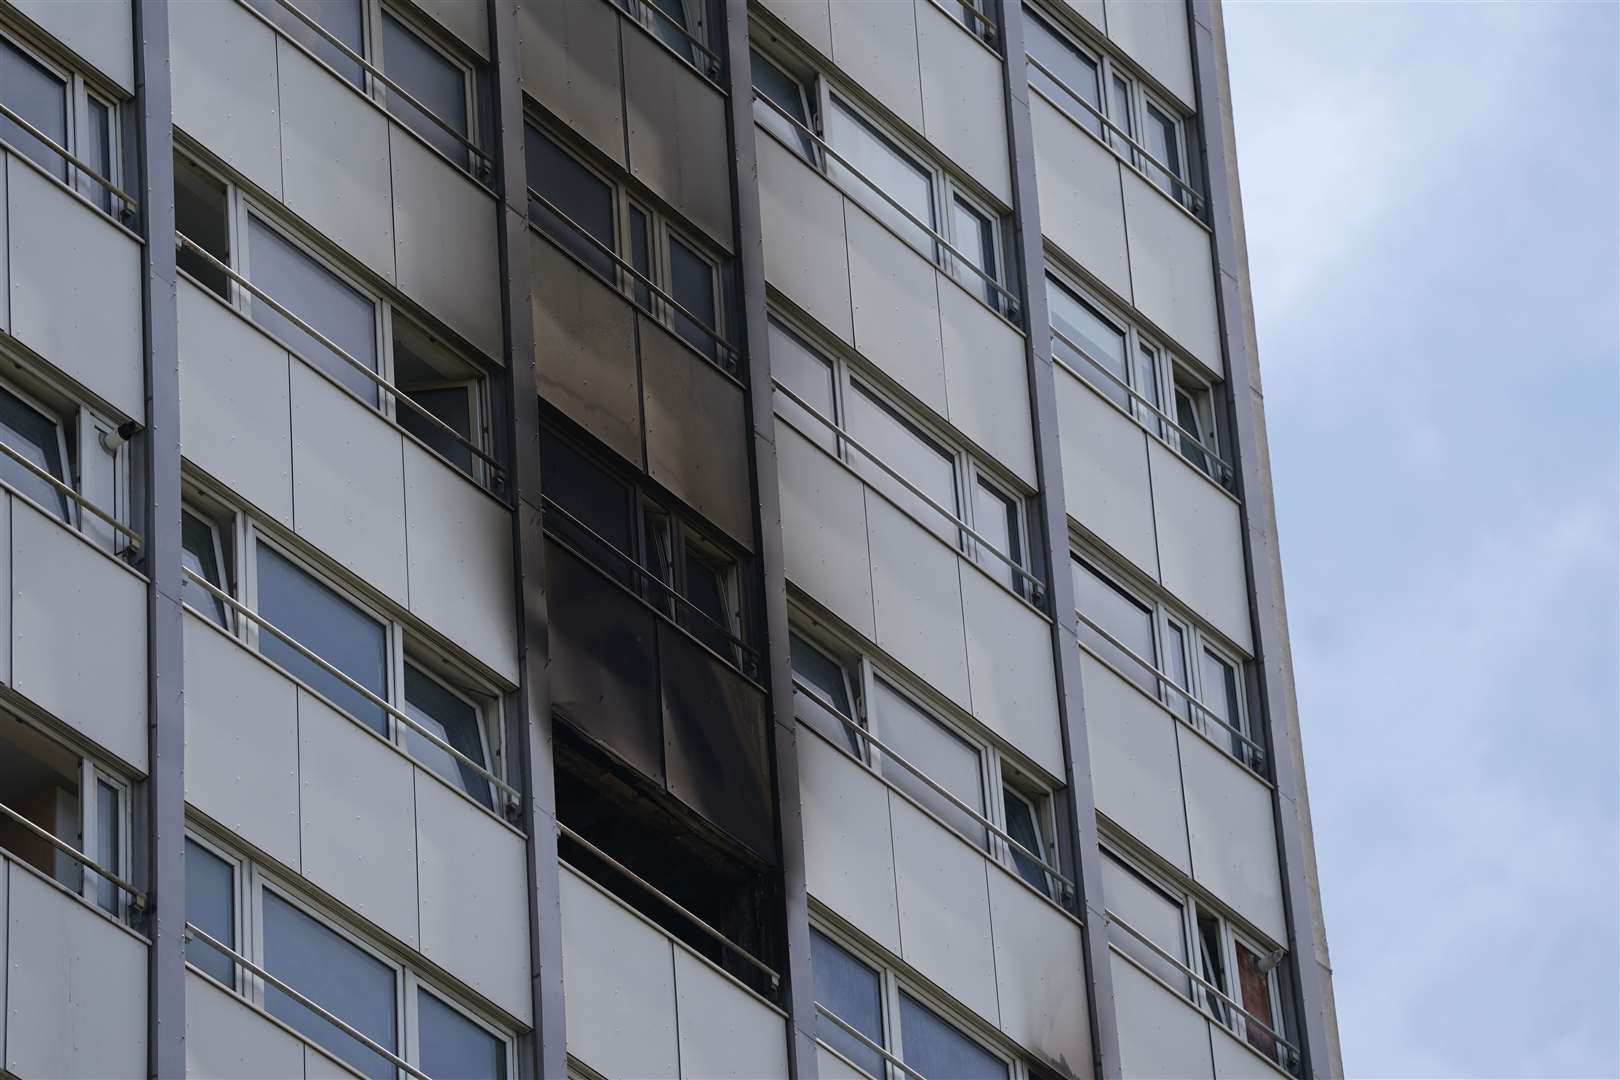 Scorch marks can be seen outside the flat after the blaze (PA)